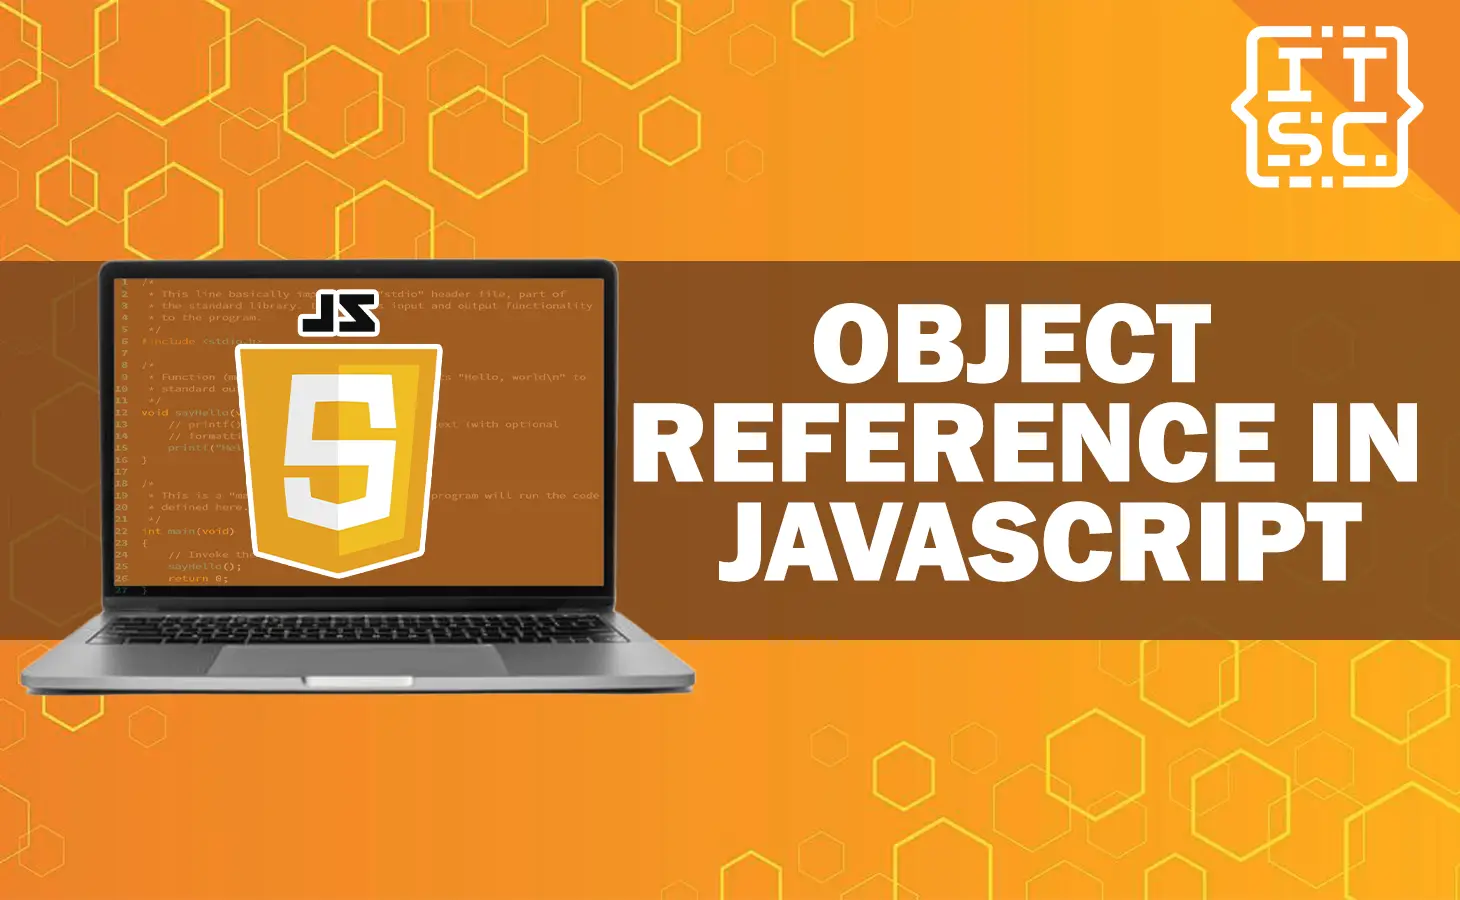 Object Reference in JavaScript